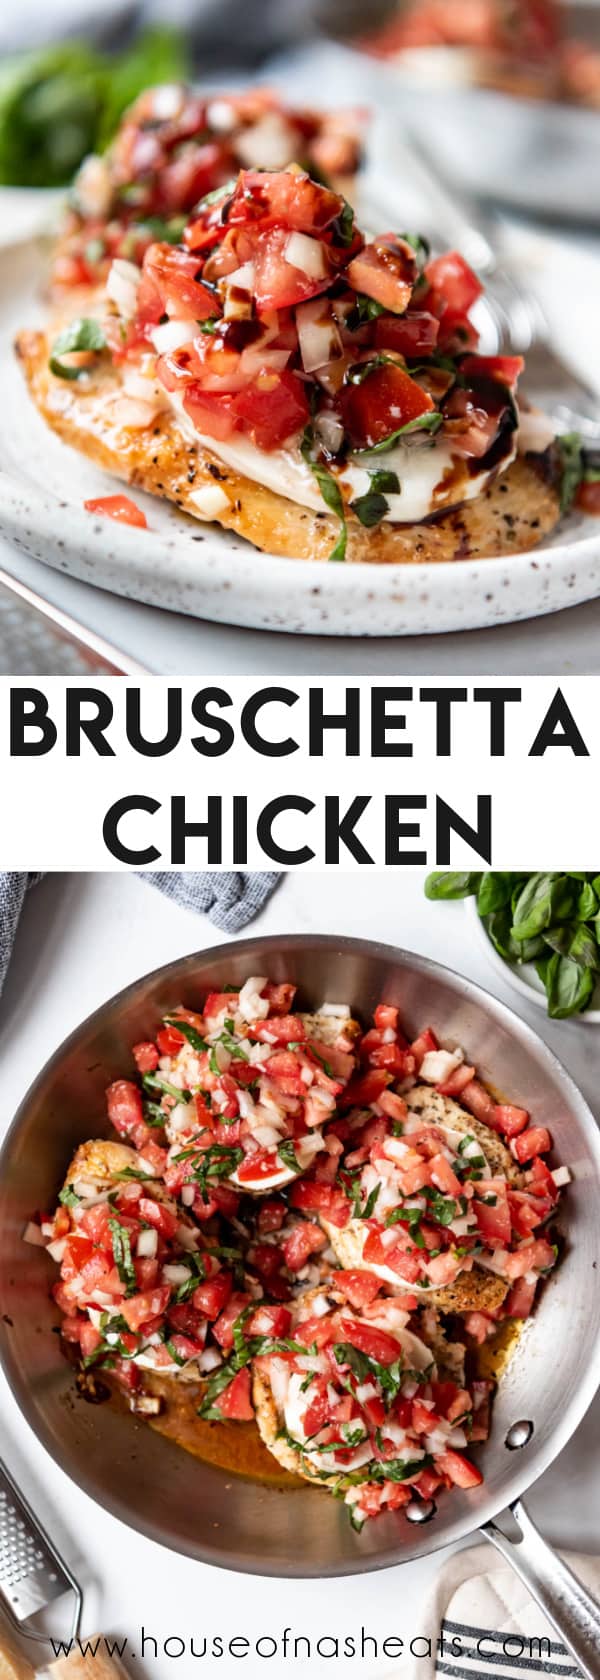 A collage of images of bruschetta chicken with text overlay.